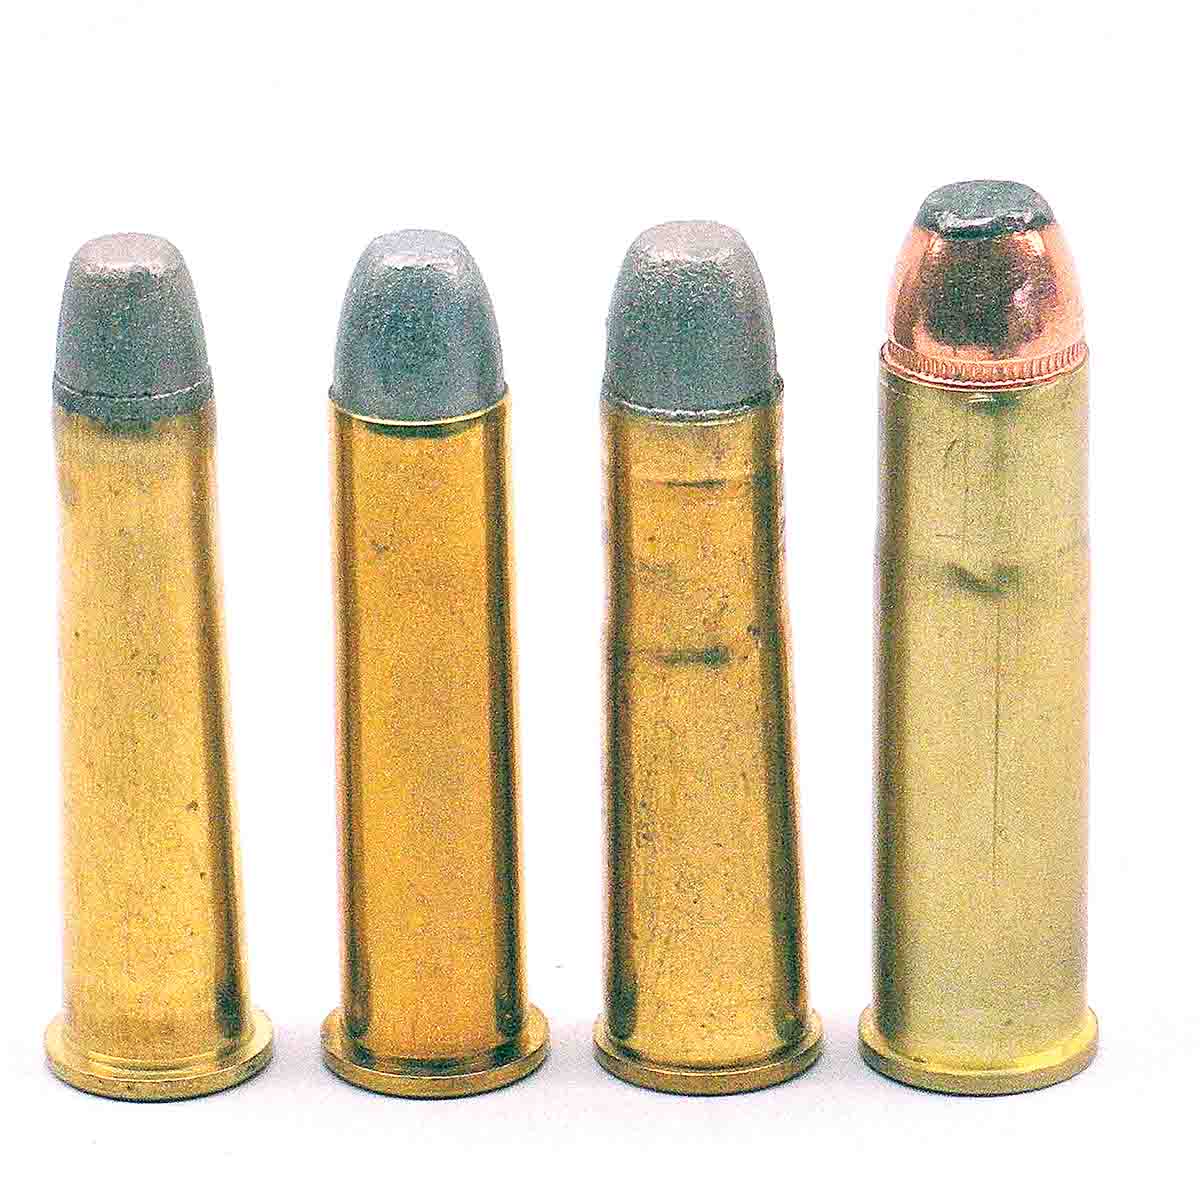 The Model 1876 Winchester was chambered for (left to right): .40-60, .45-60, .45-75 and .50-95 WCFs.